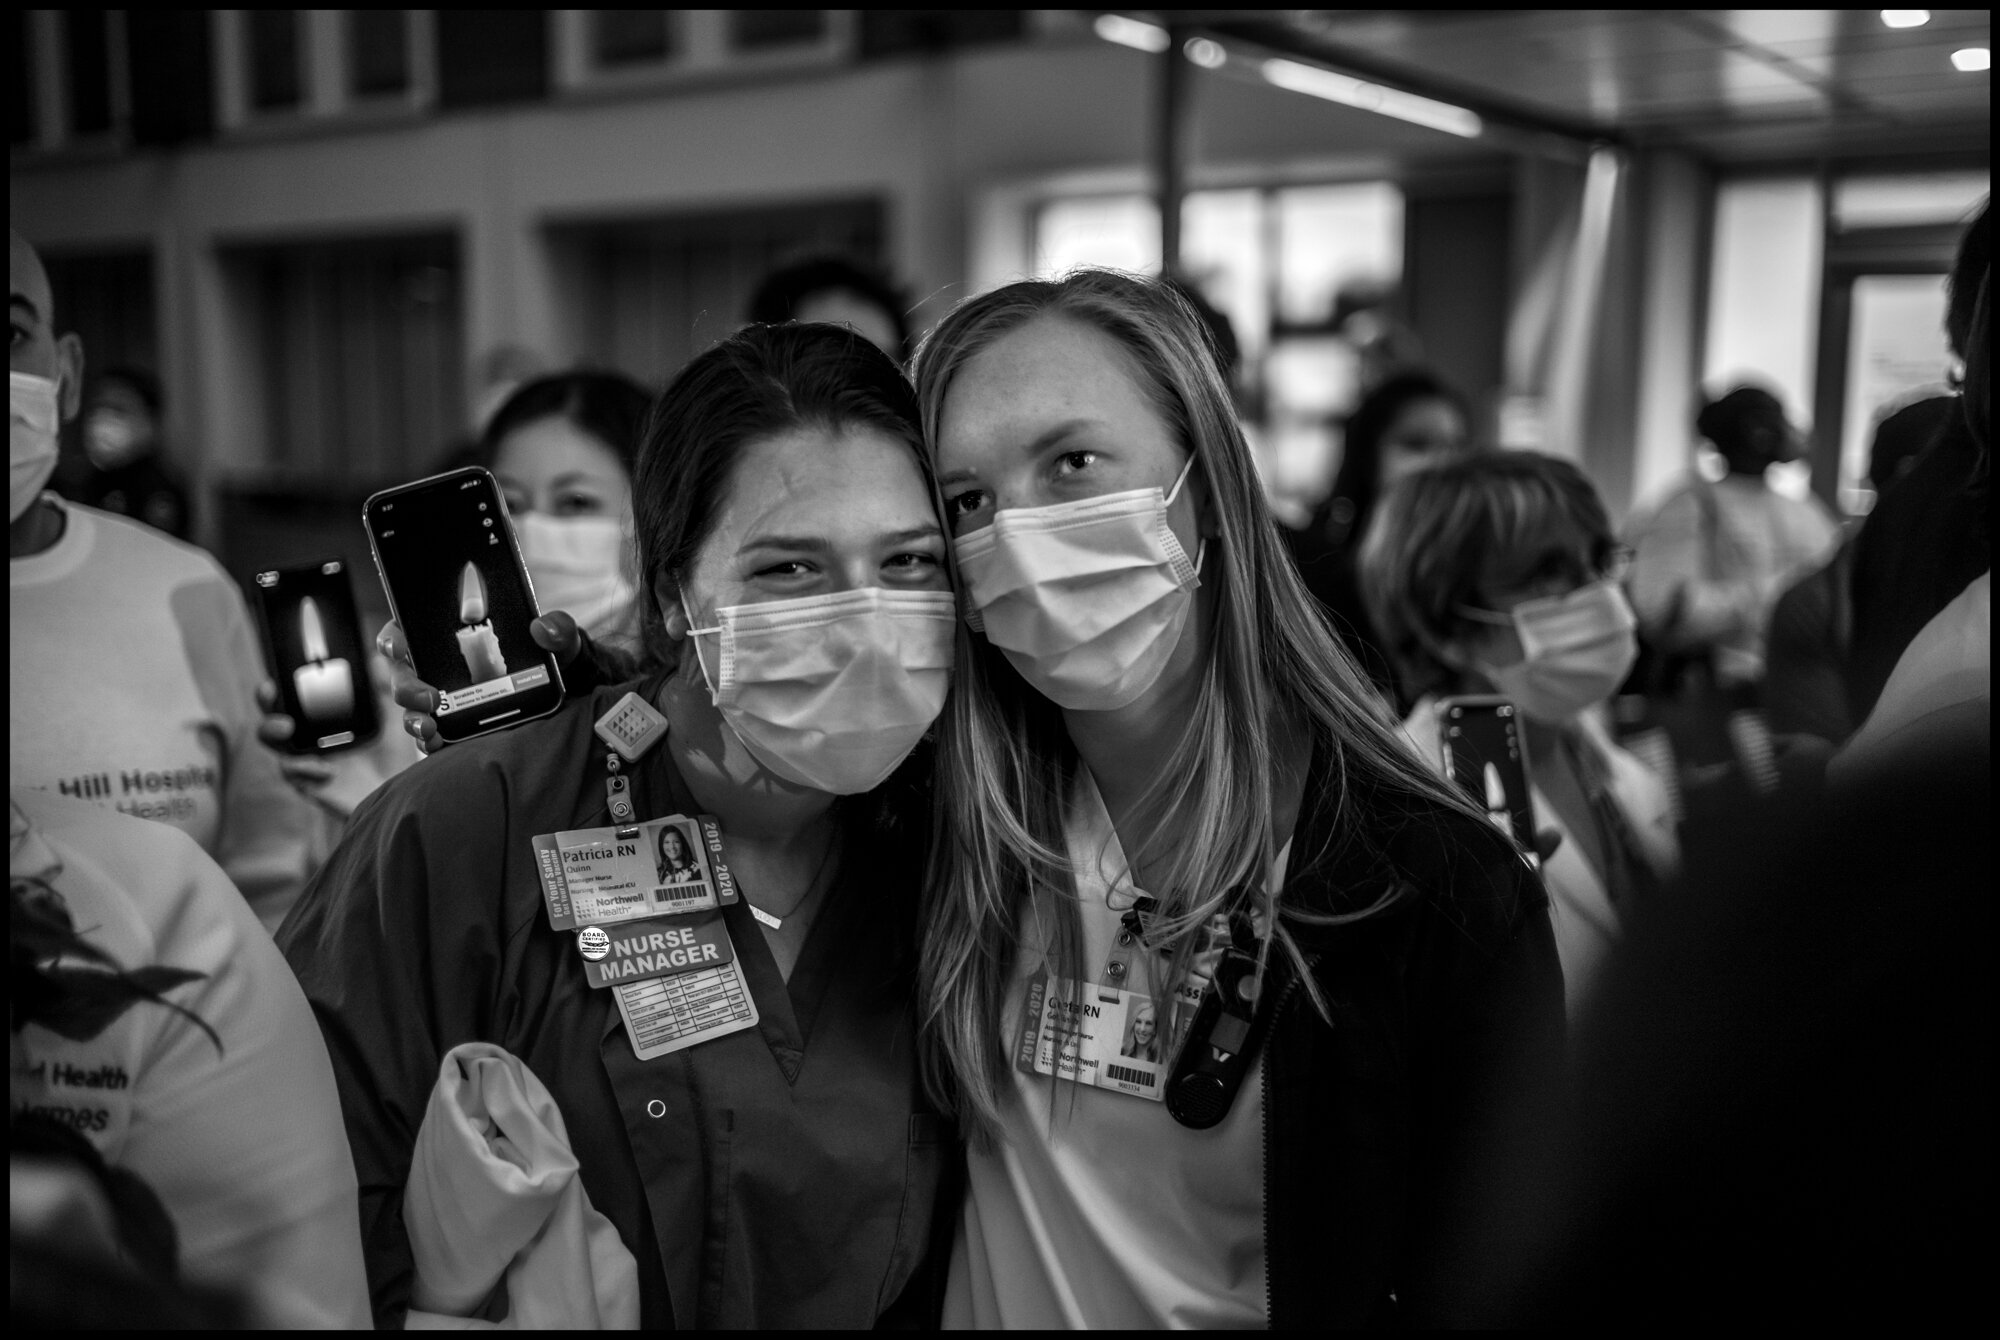  Frontline workers from Lenox Hill Hospital, New York, hold vigil to honor all victims of COVID-19.  May 20, 2020. © Peter Turnley.   ID# 51-012 